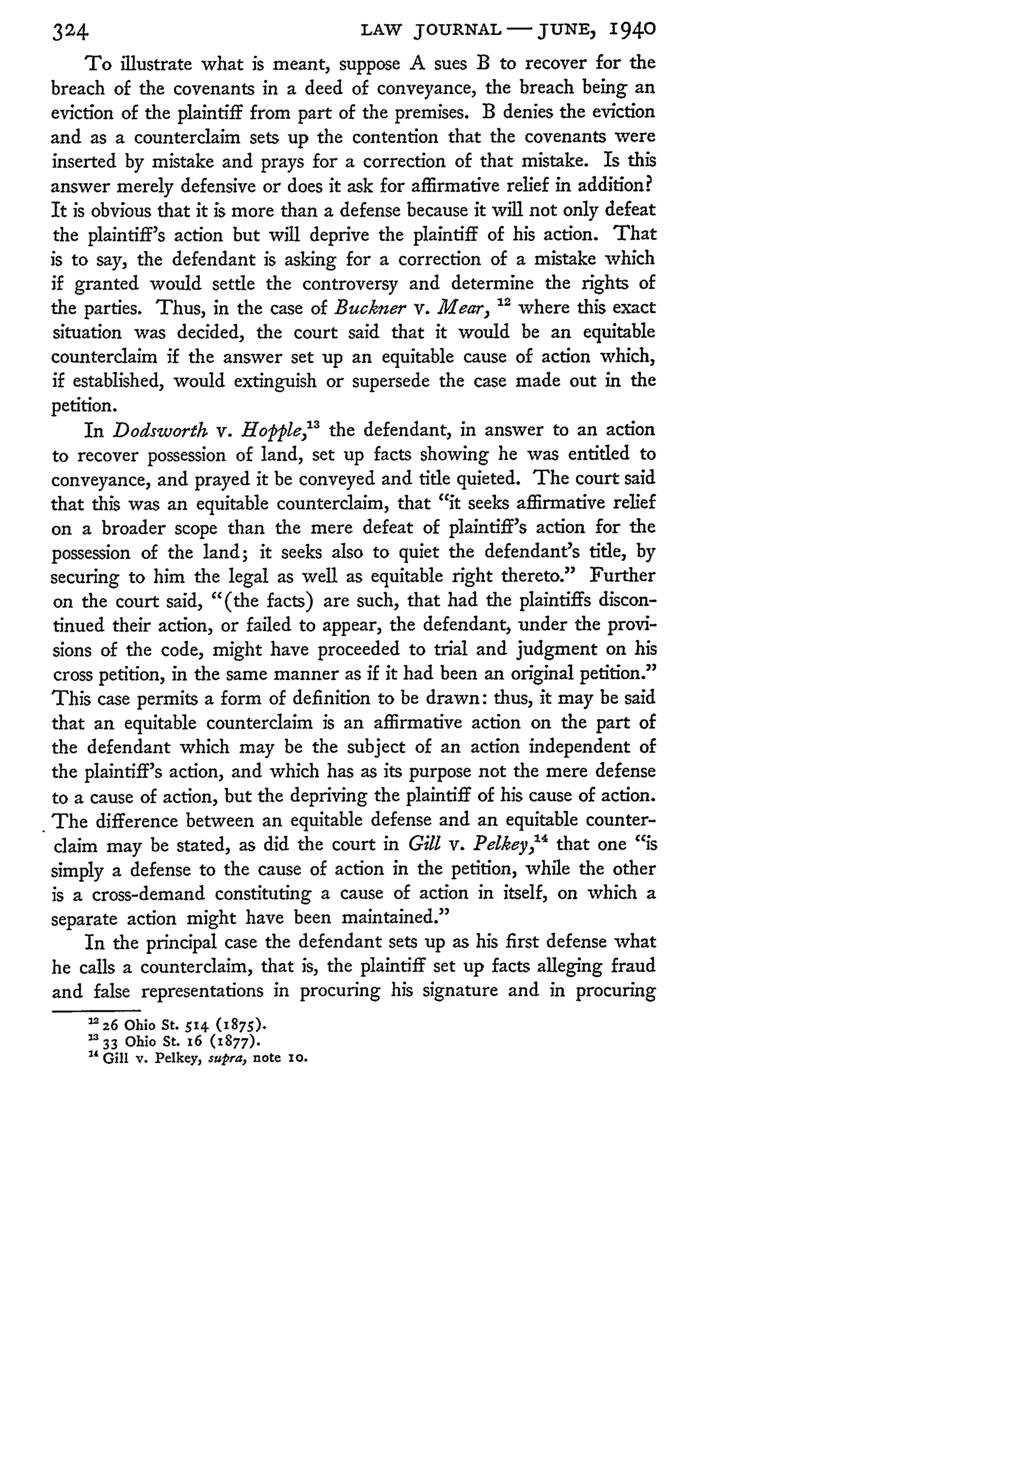 324 LAW JOURNAL- JUNE) 1940 To illustrate what is meant, suppose A sues B to recover for the breach of the covenants in a deed of conveyance, the breach being an eviction of the plaintiff from part